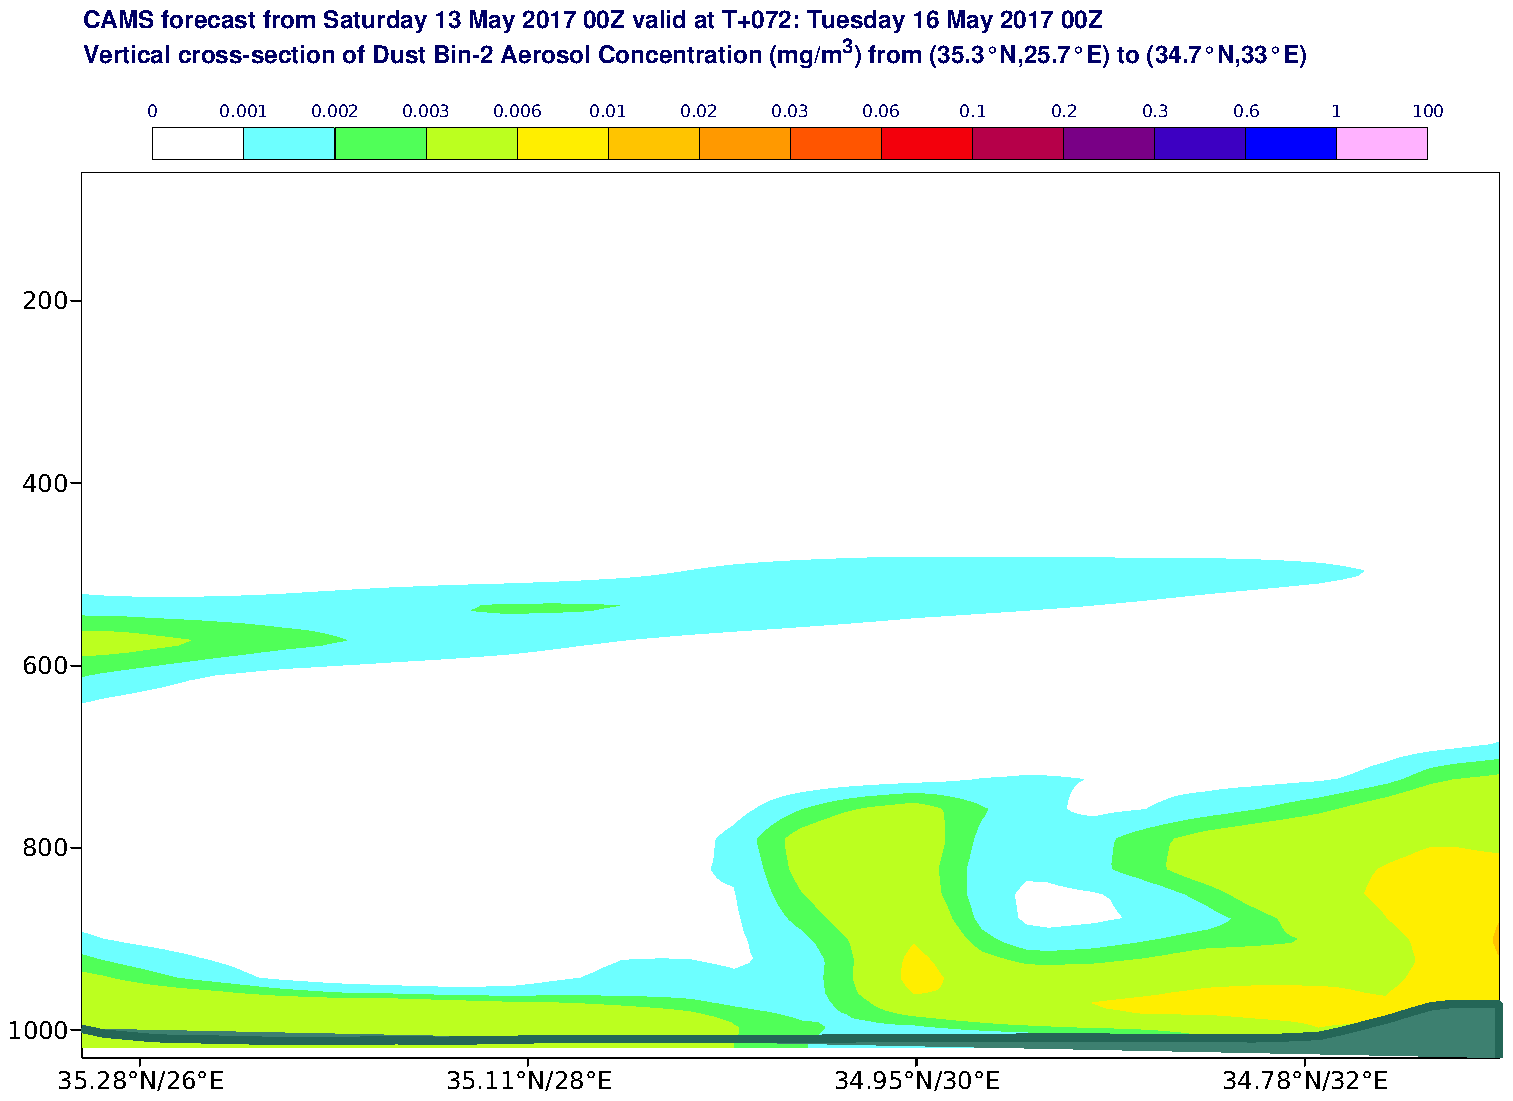 Vertical cross-section of Dust Bin-2 Aerosol Concentration (mg/m3) valid at T72 - 2017-05-16 00:00